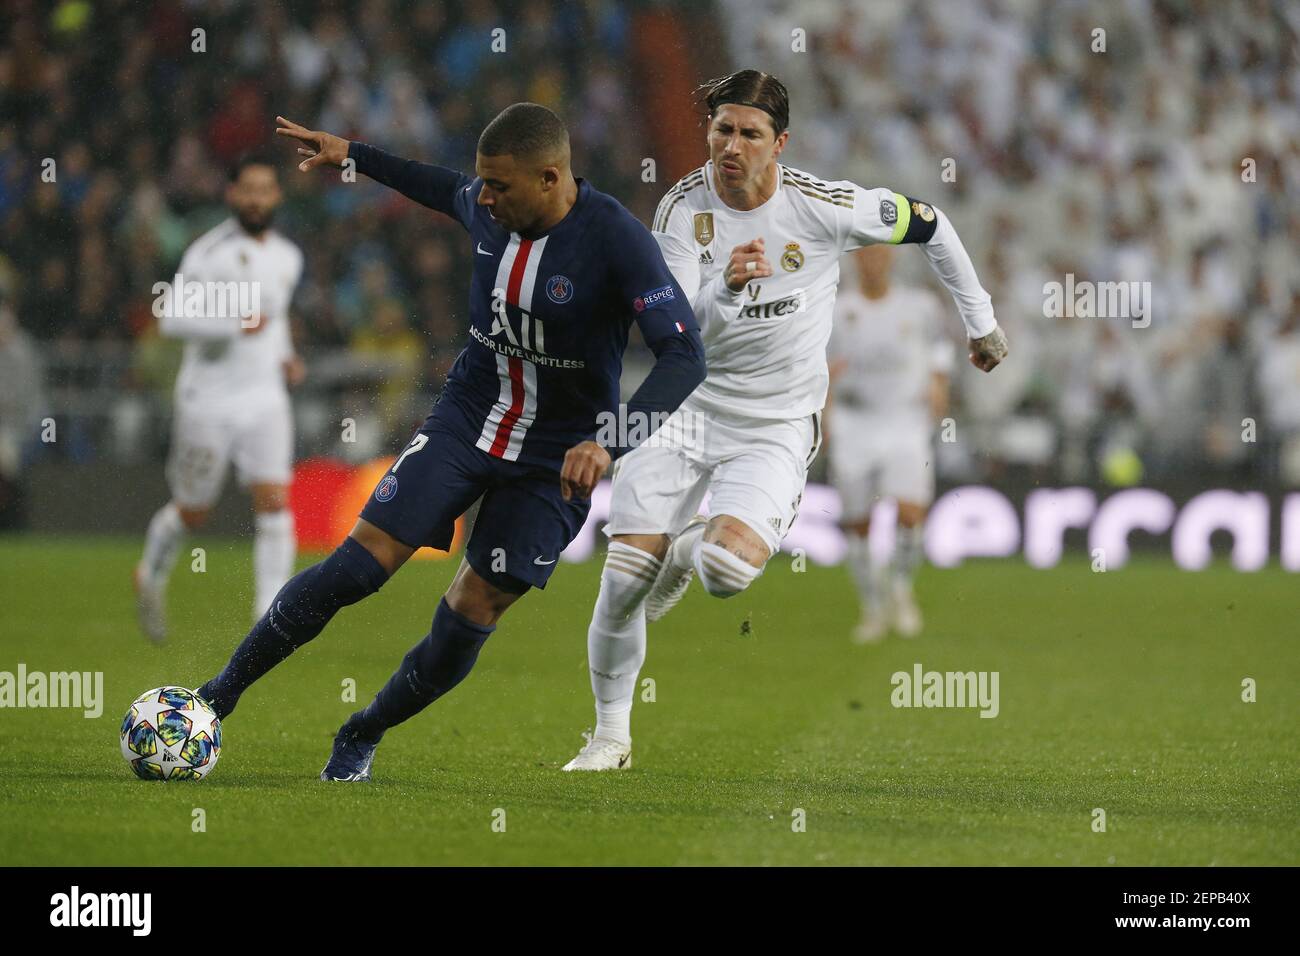 Kylian Mbappe of PSG and Real Madrid CFs Sergio Ramos are seen in action during the UEFA Champions League match, between Real Madrid and Paris Saint Germain at Santiago Bernabeu Stadium in